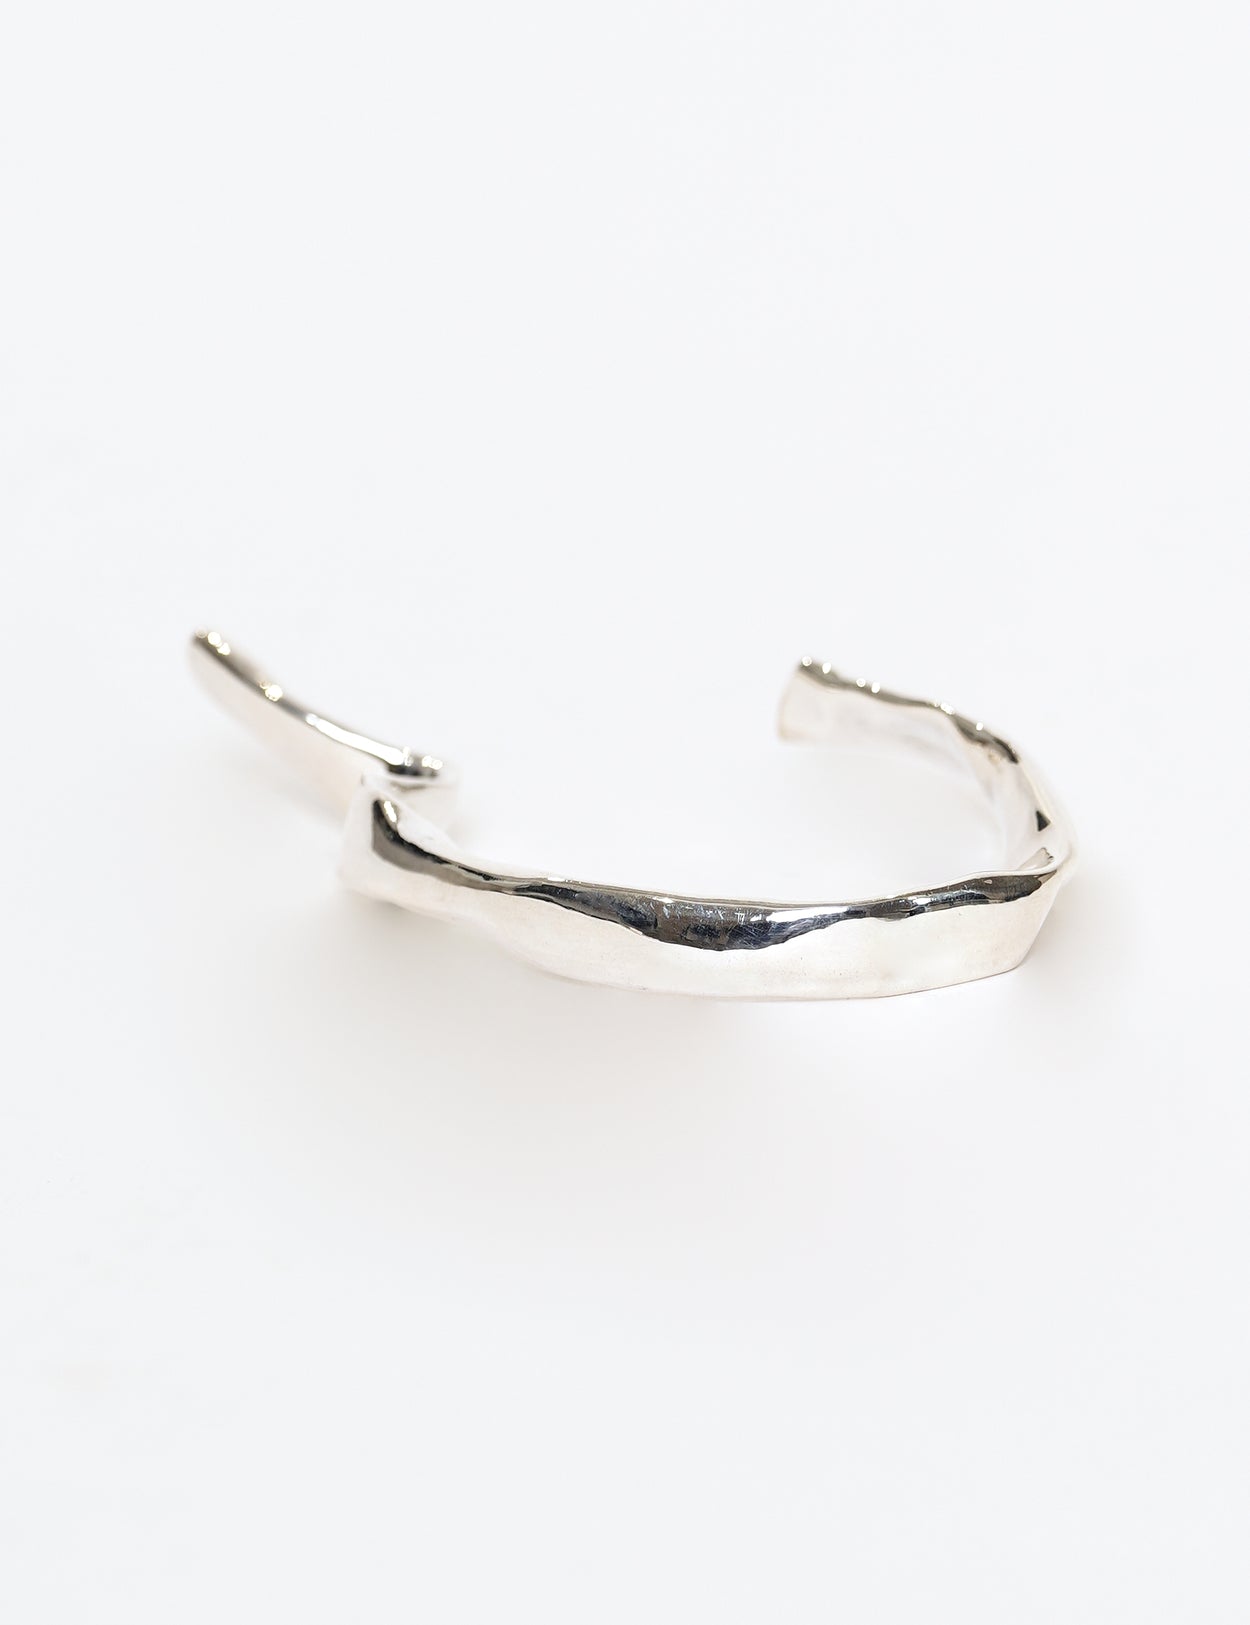 SILVER HAMMER-CRAFTED BANGLE (THICK)